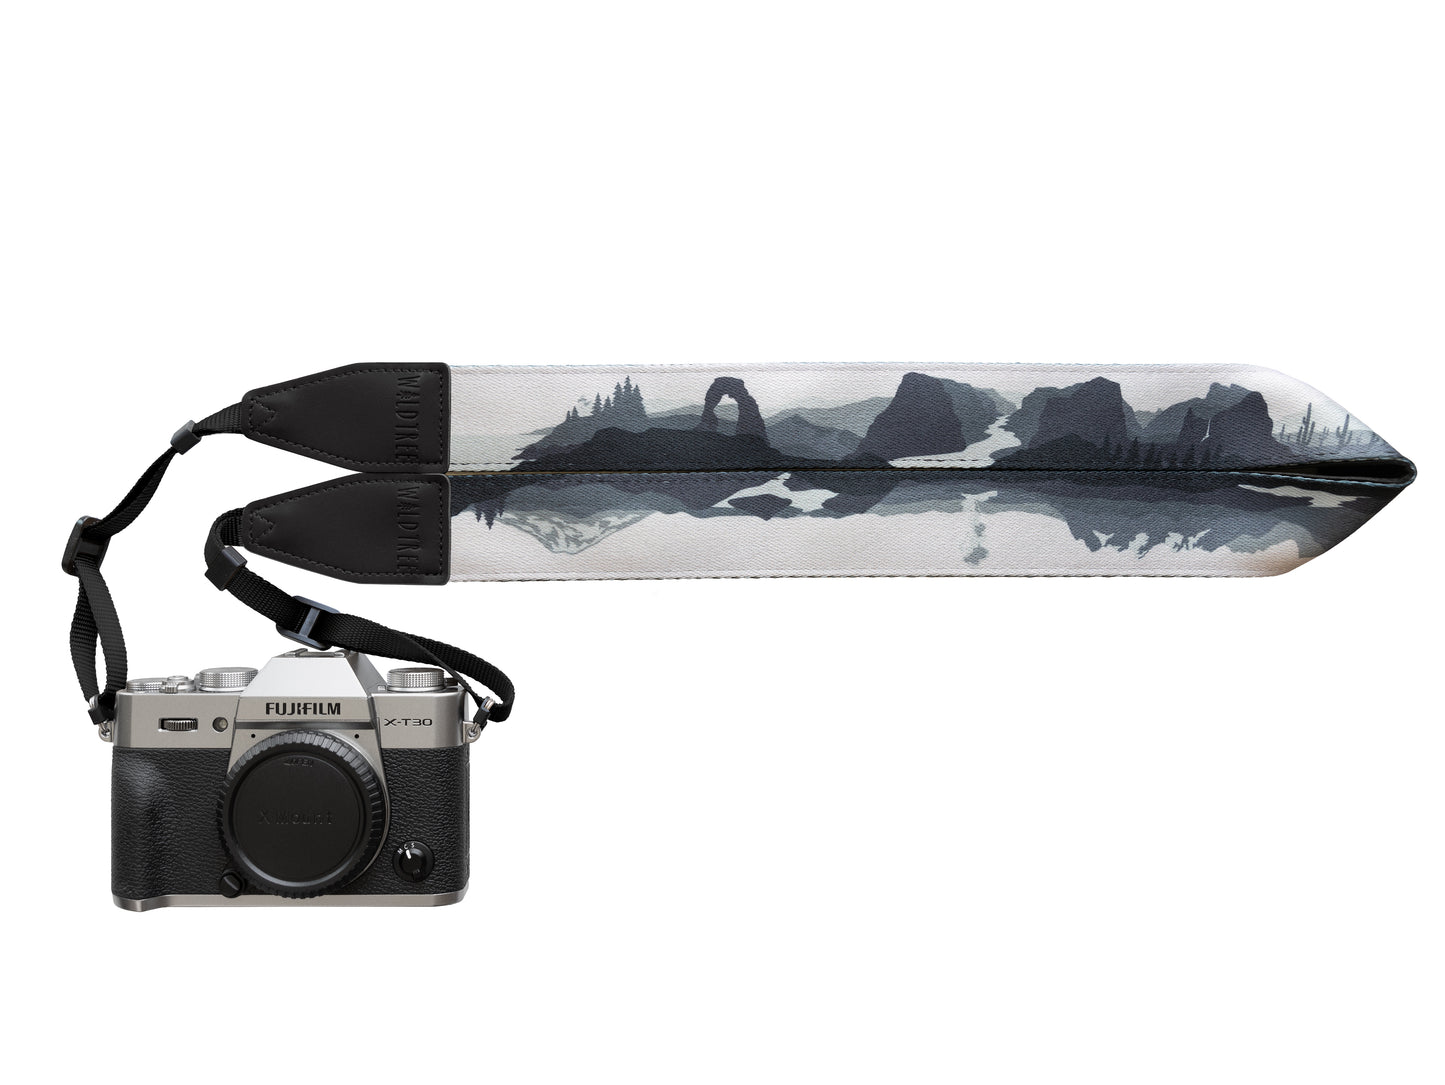 USA National parks camera strap by wildtree in black and white. features 11 national parks, black leather ends and backing